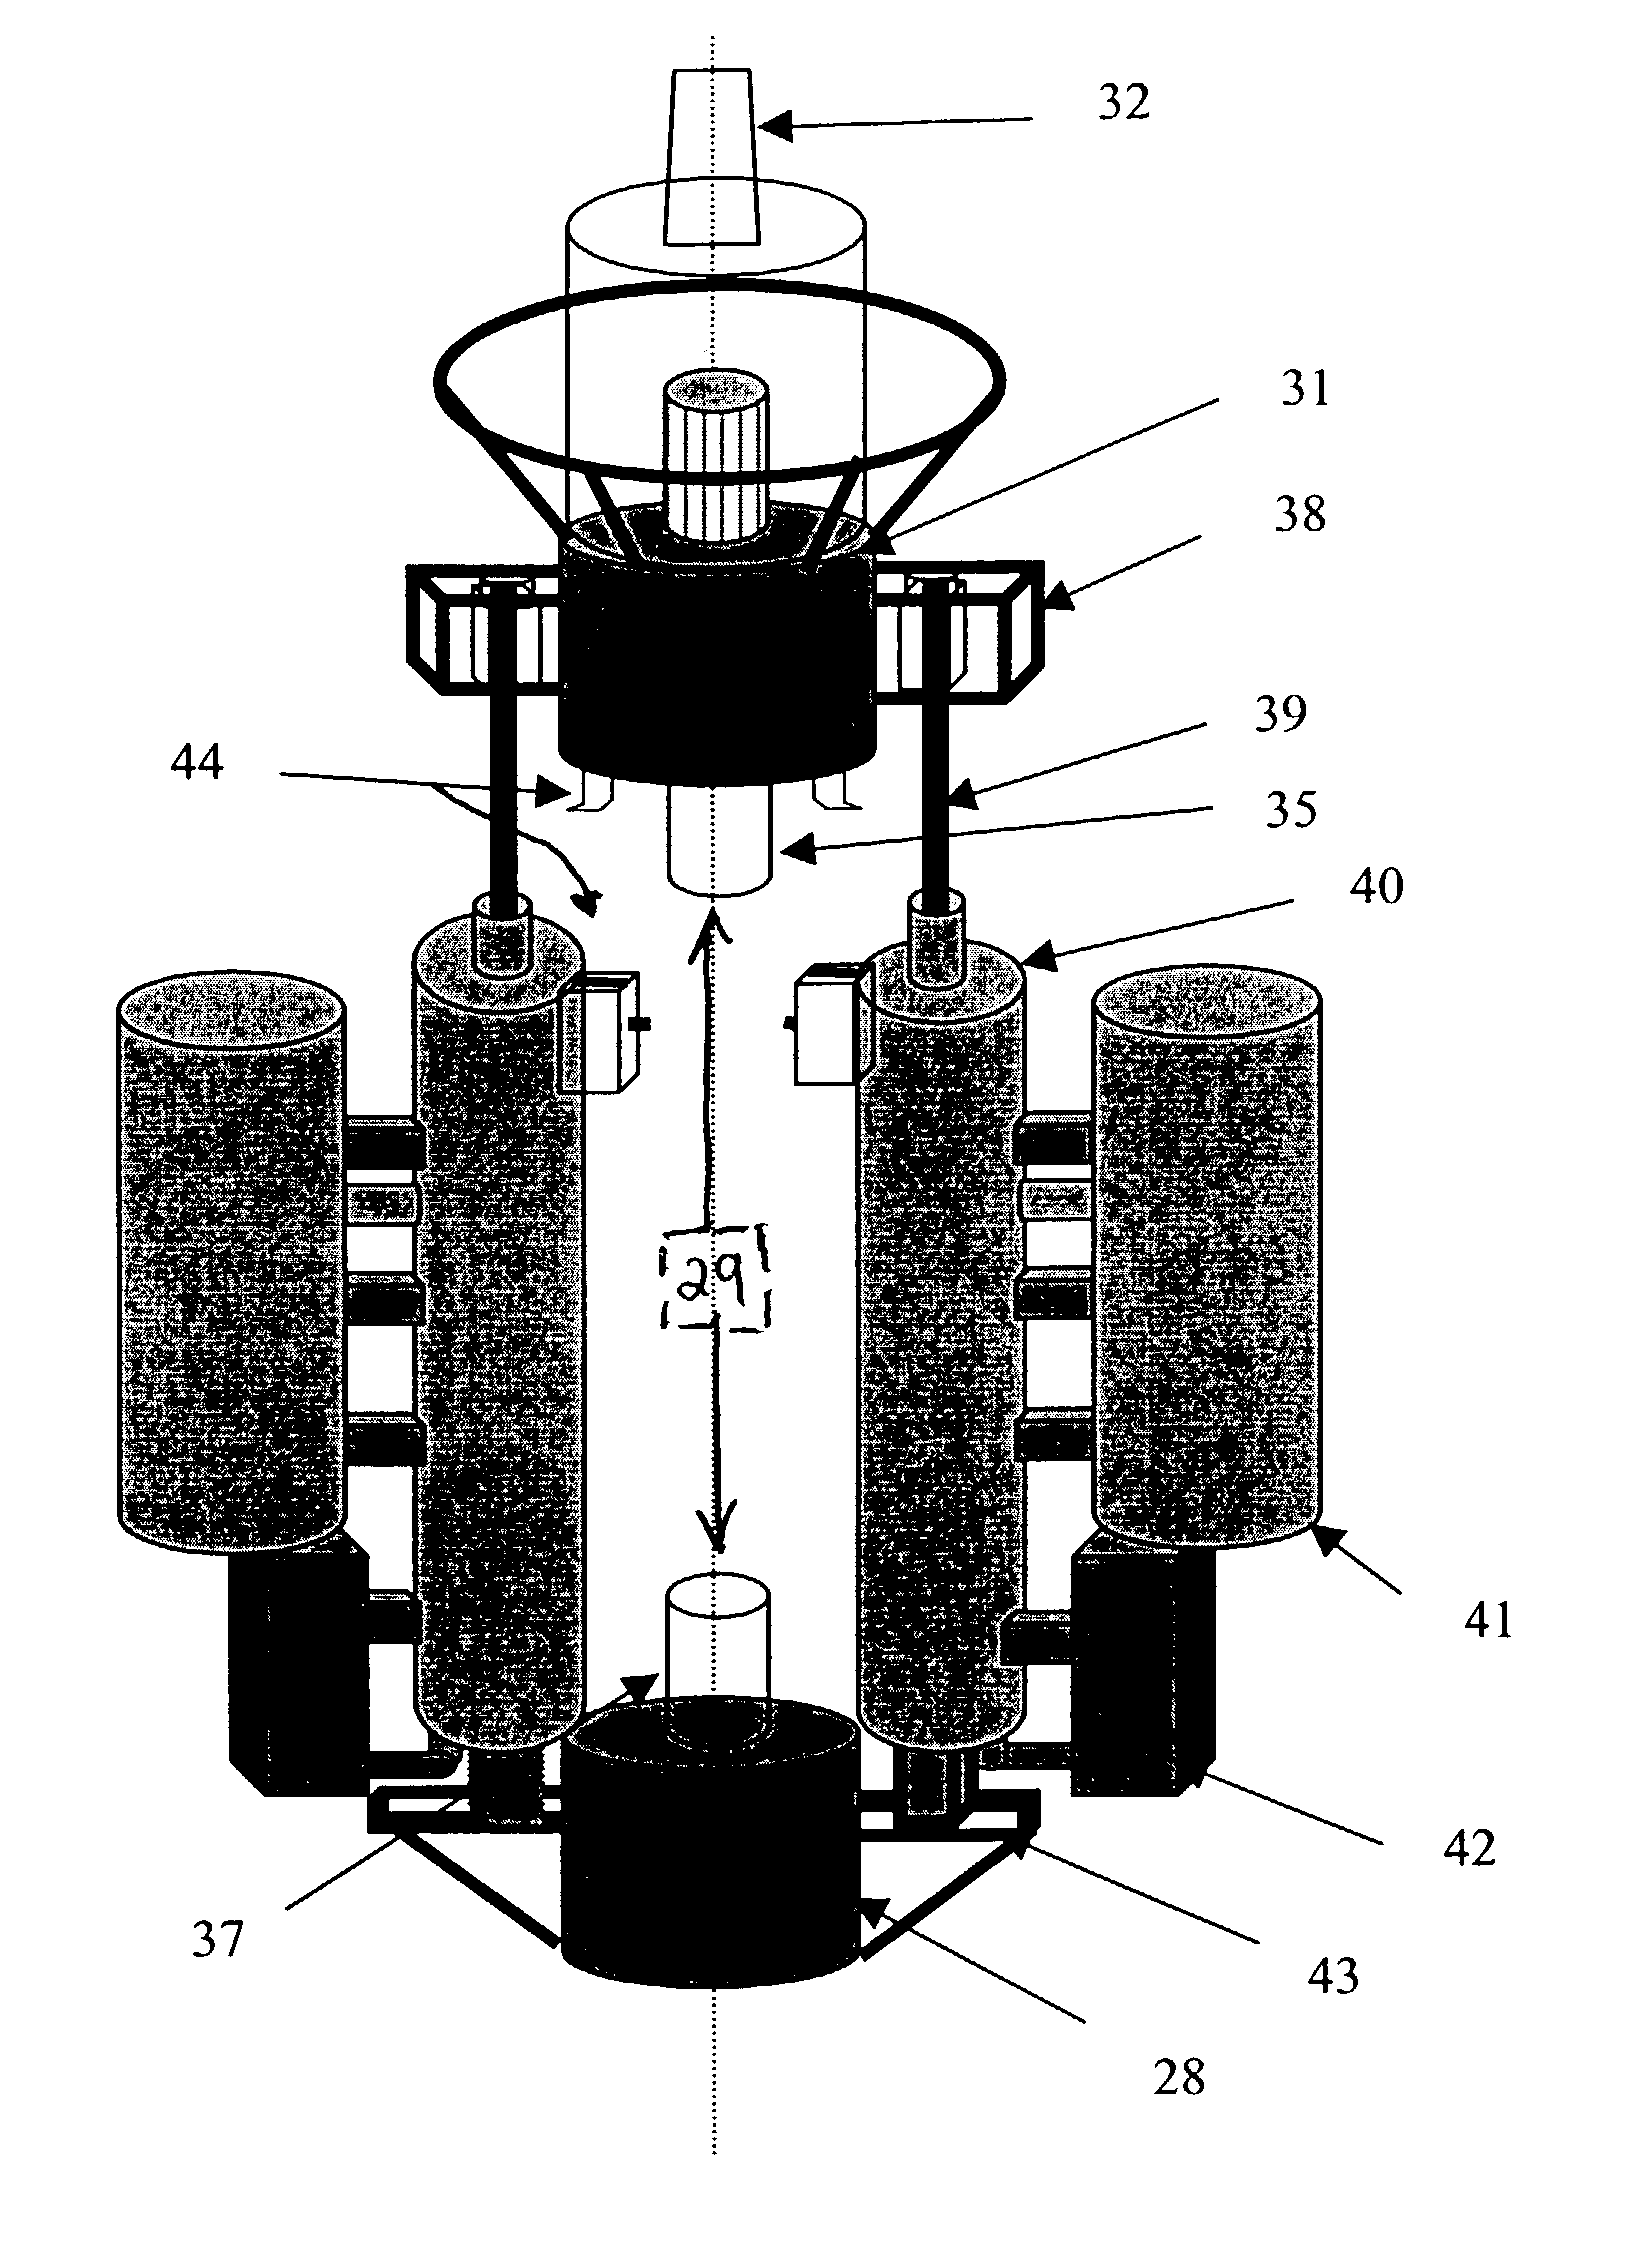 Marine bottomed tensioned riser and method